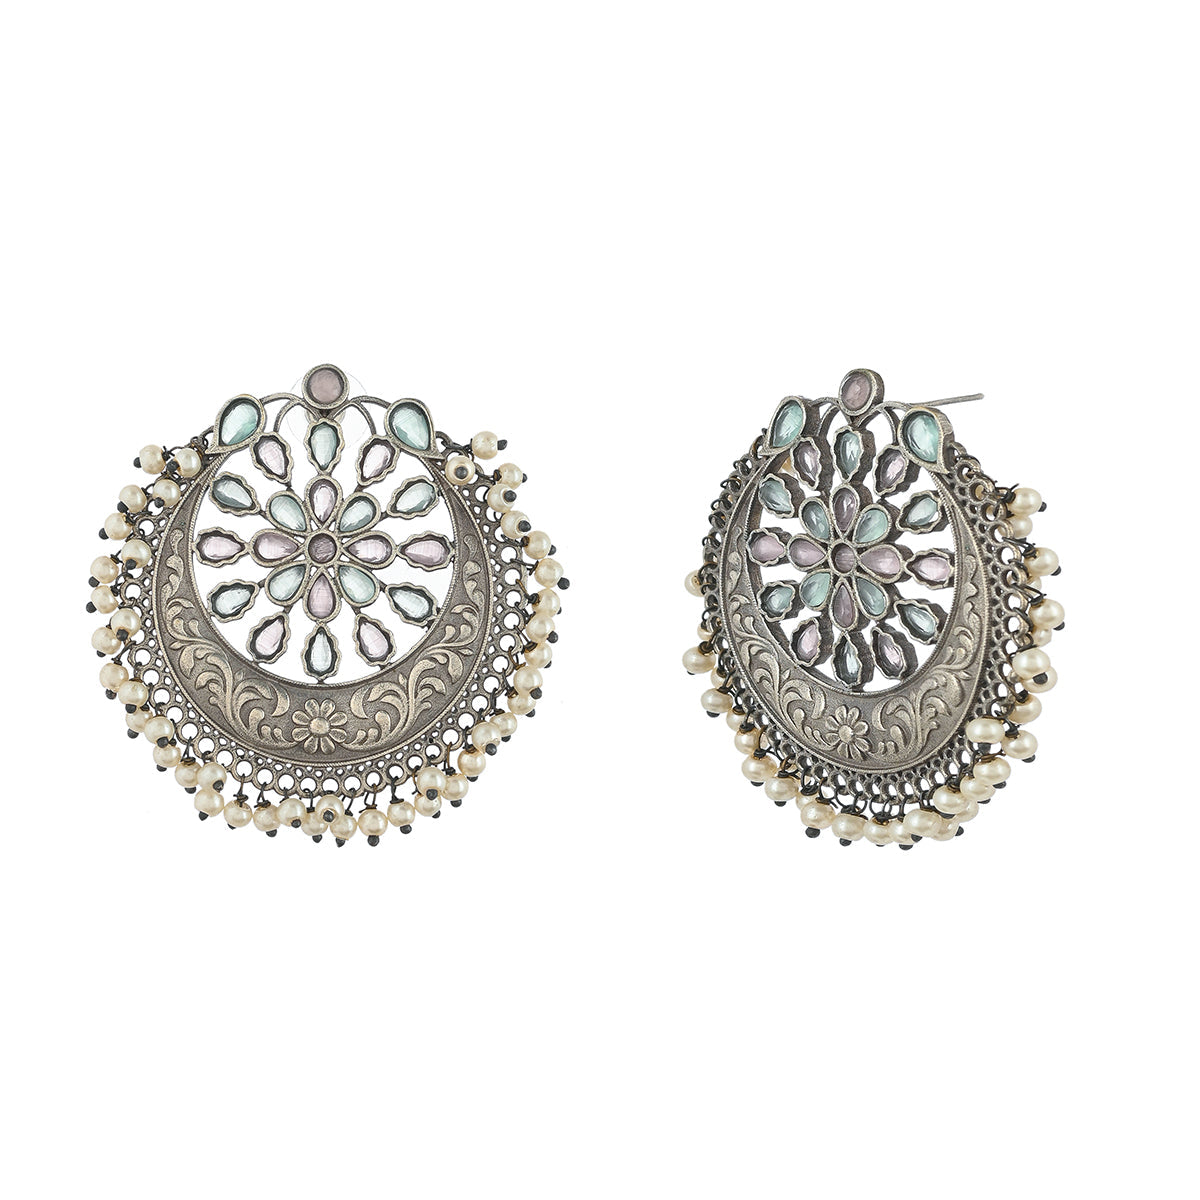 Women's Antique Elegance Floral Faux Pearls And Kundan Adorned Silver Toned Brass Earrings - Voylla